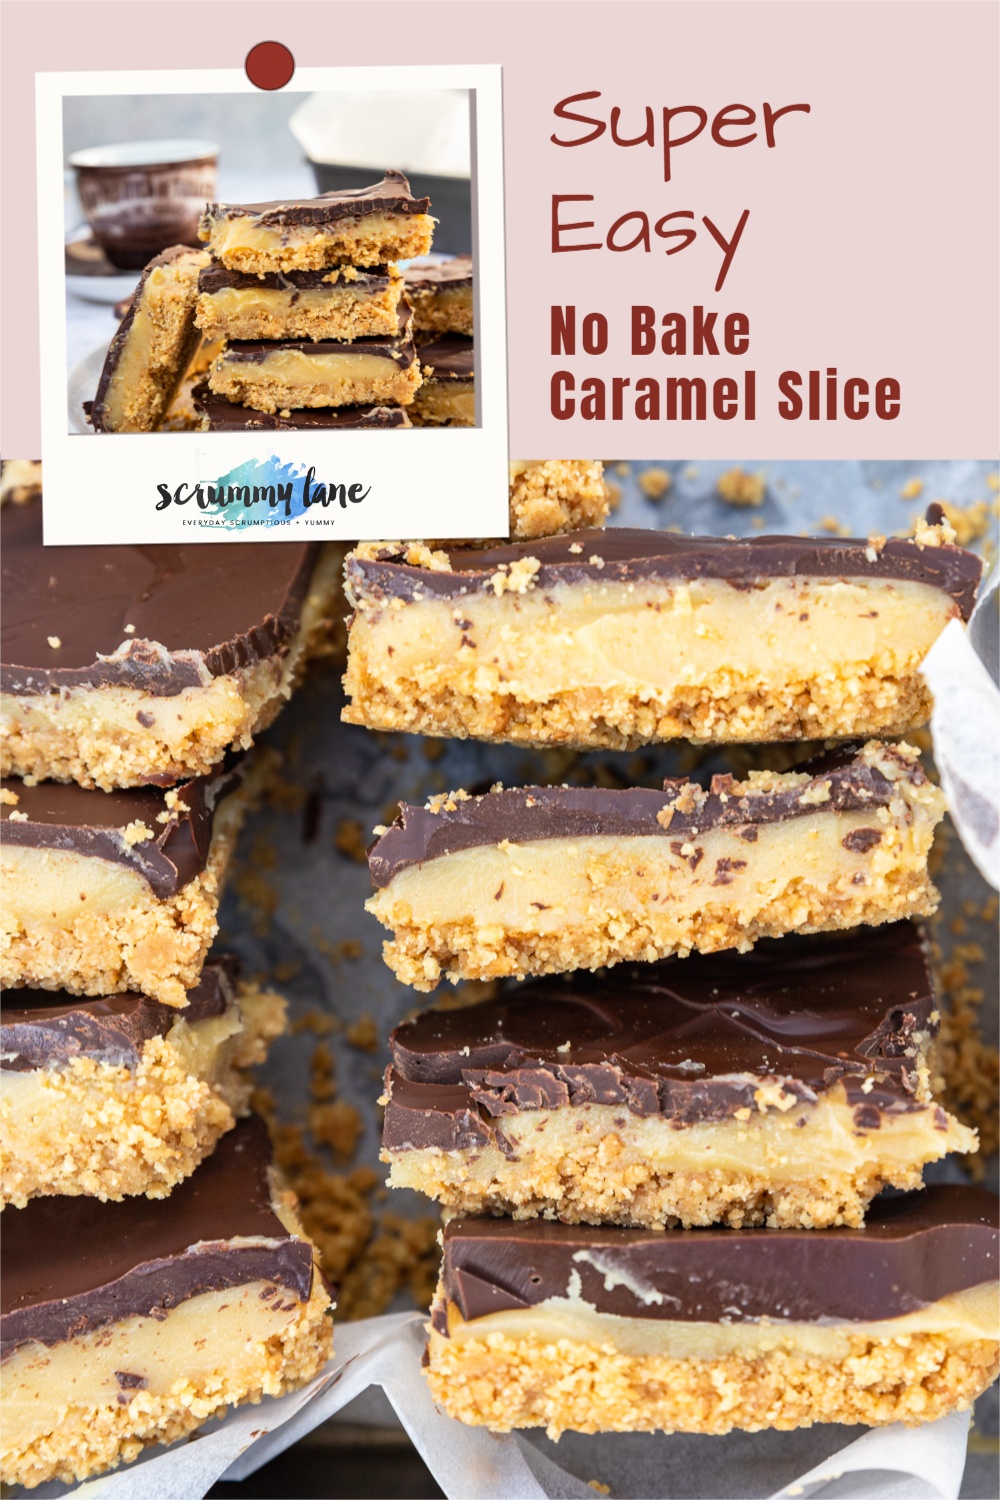 Large photo of caramel slice on its side in a tin with a smaller image of caramel slice above with a title for Pinterest